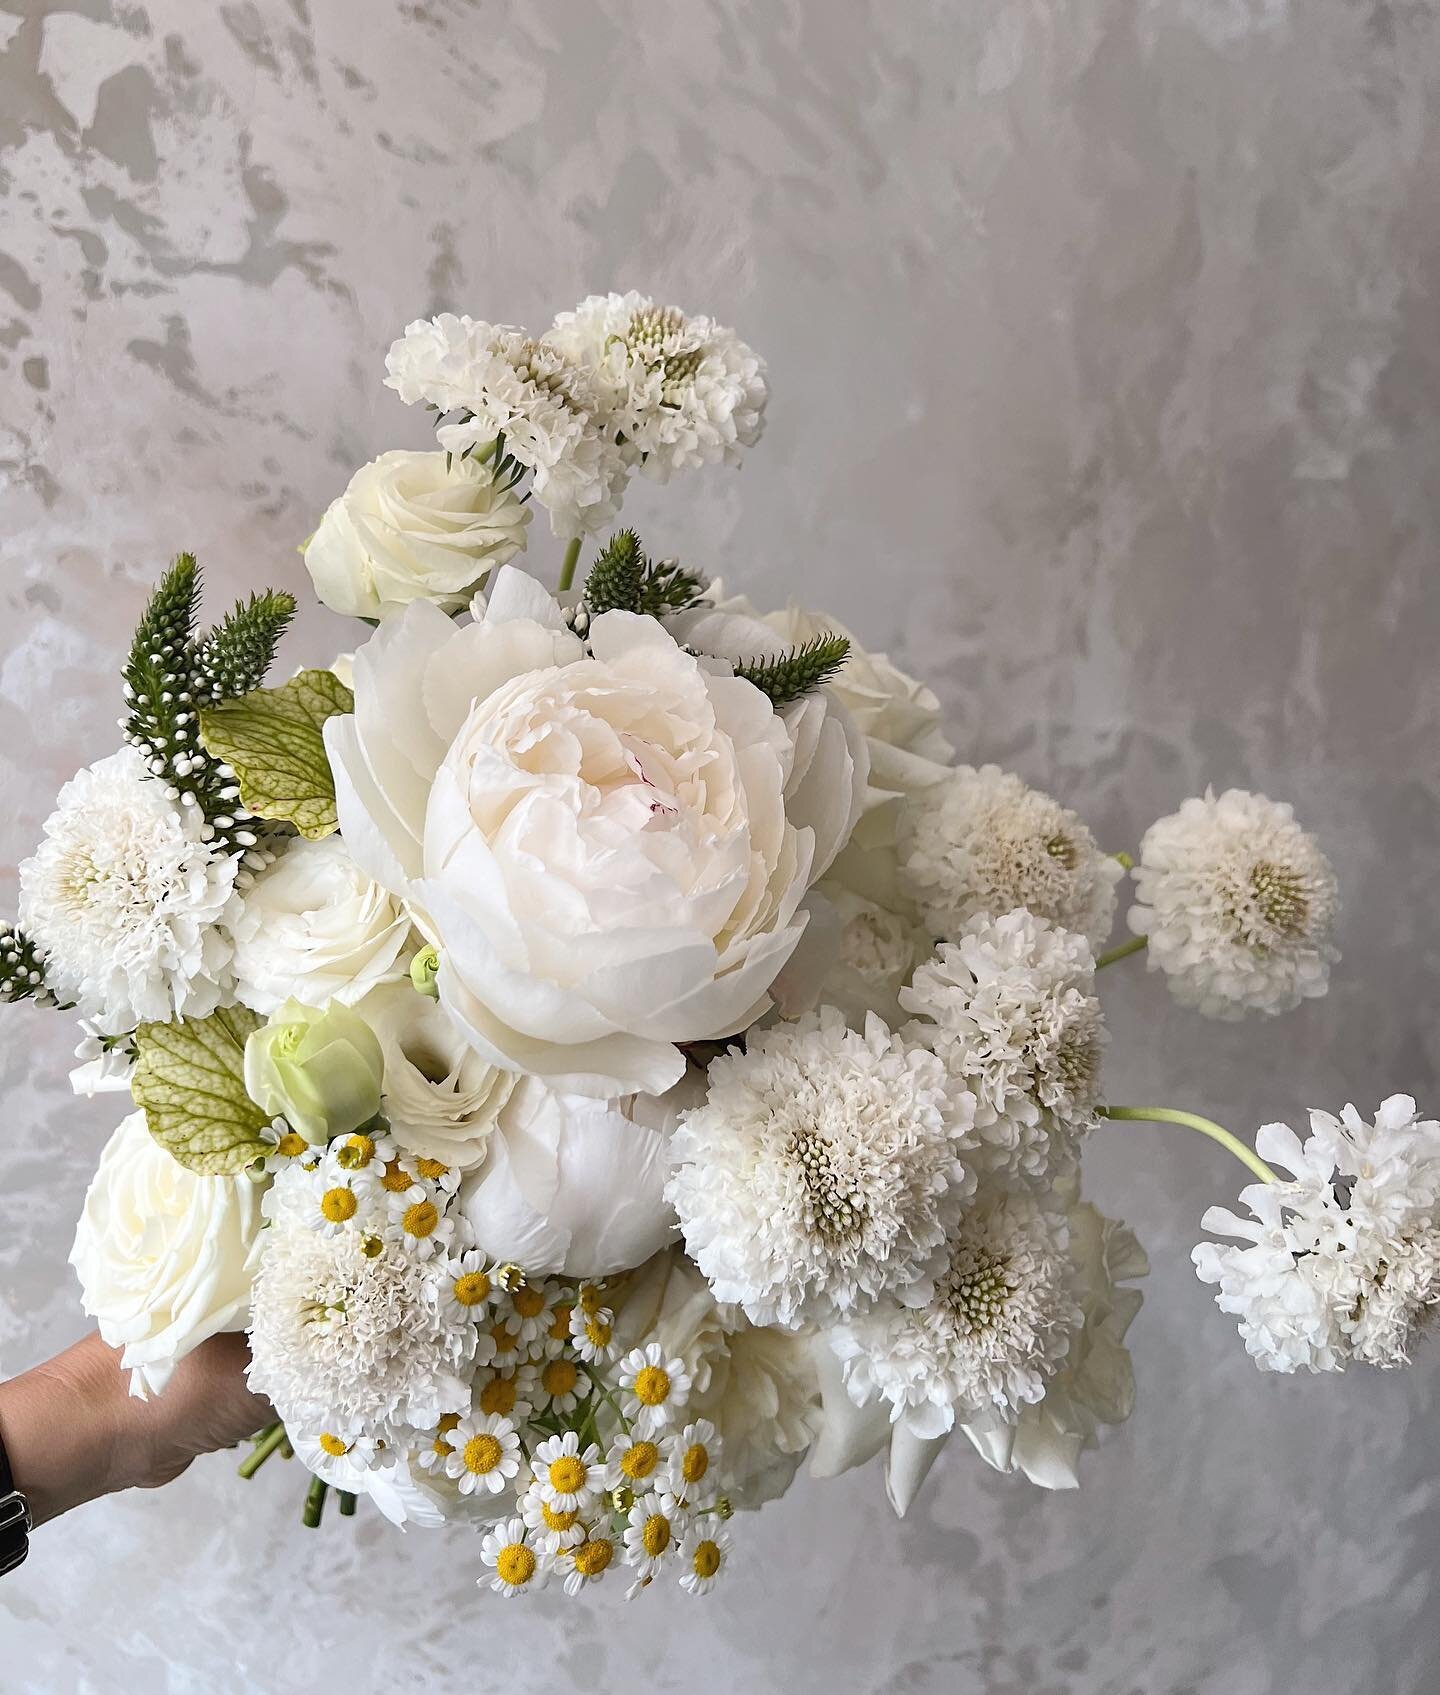 When spring flowers make it right through till Christmas. 🤍🤍🤍 bridal bouquet for Lauren  x ☁️ ☁️ ☁️